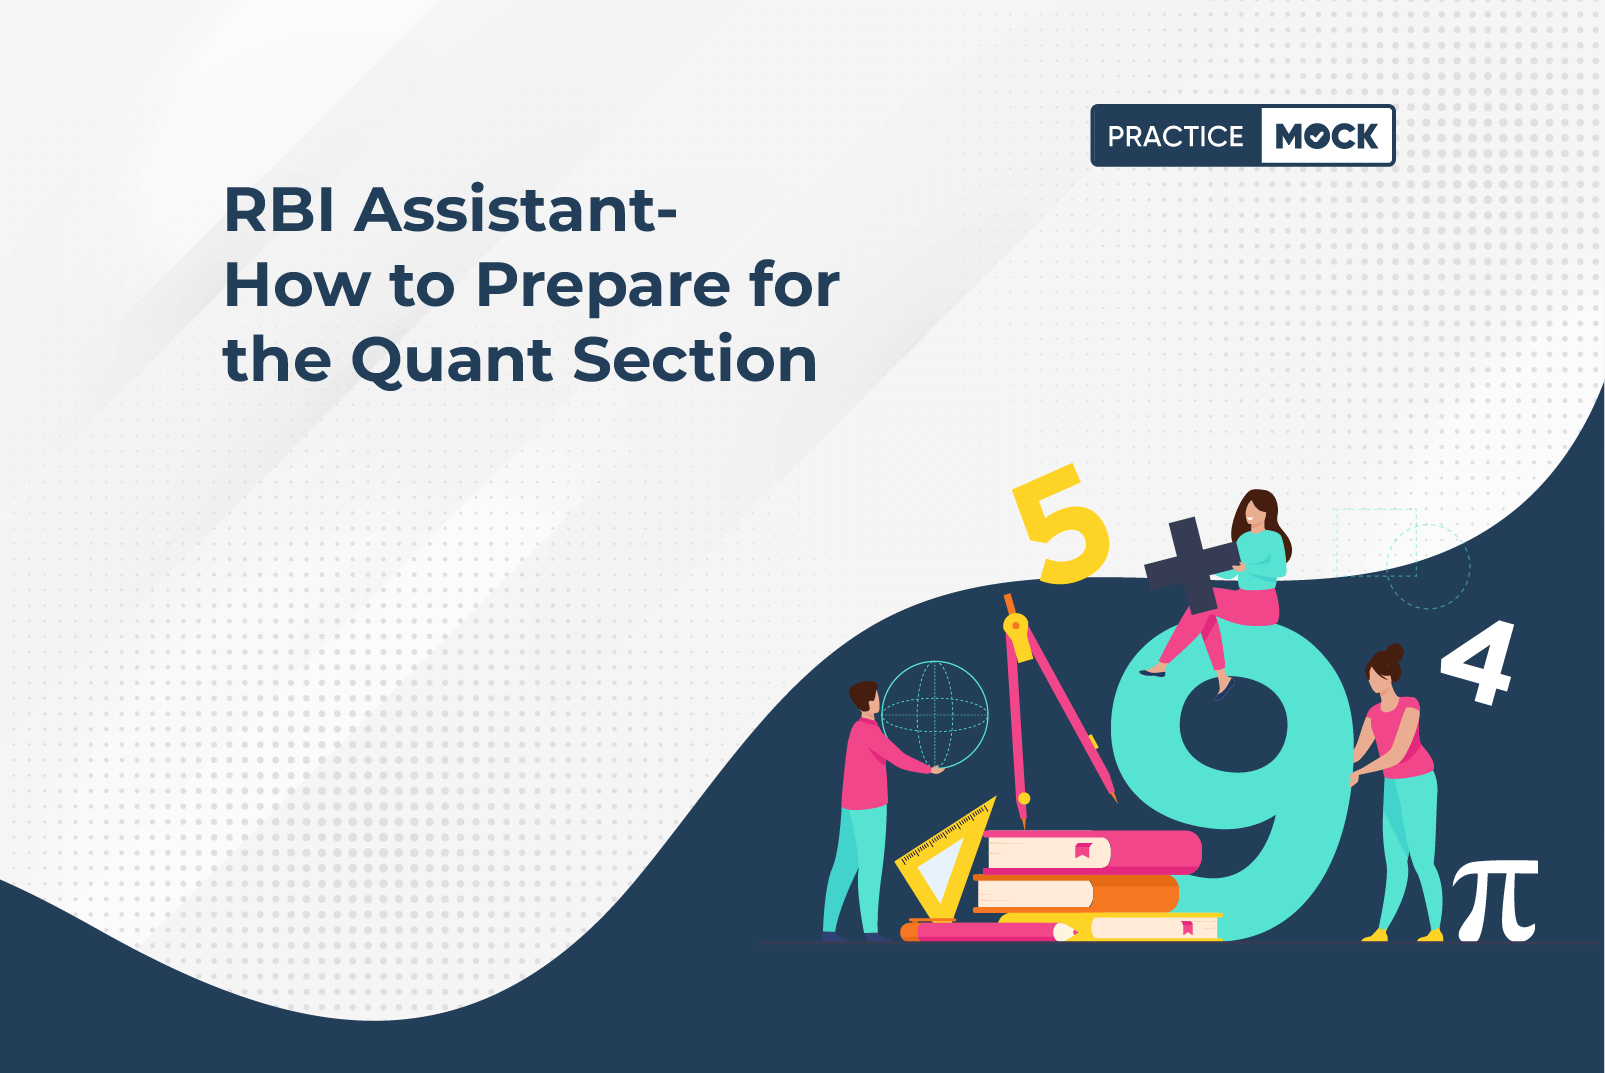 RBI Assistant- How to Prepare for the Quant Section (1)